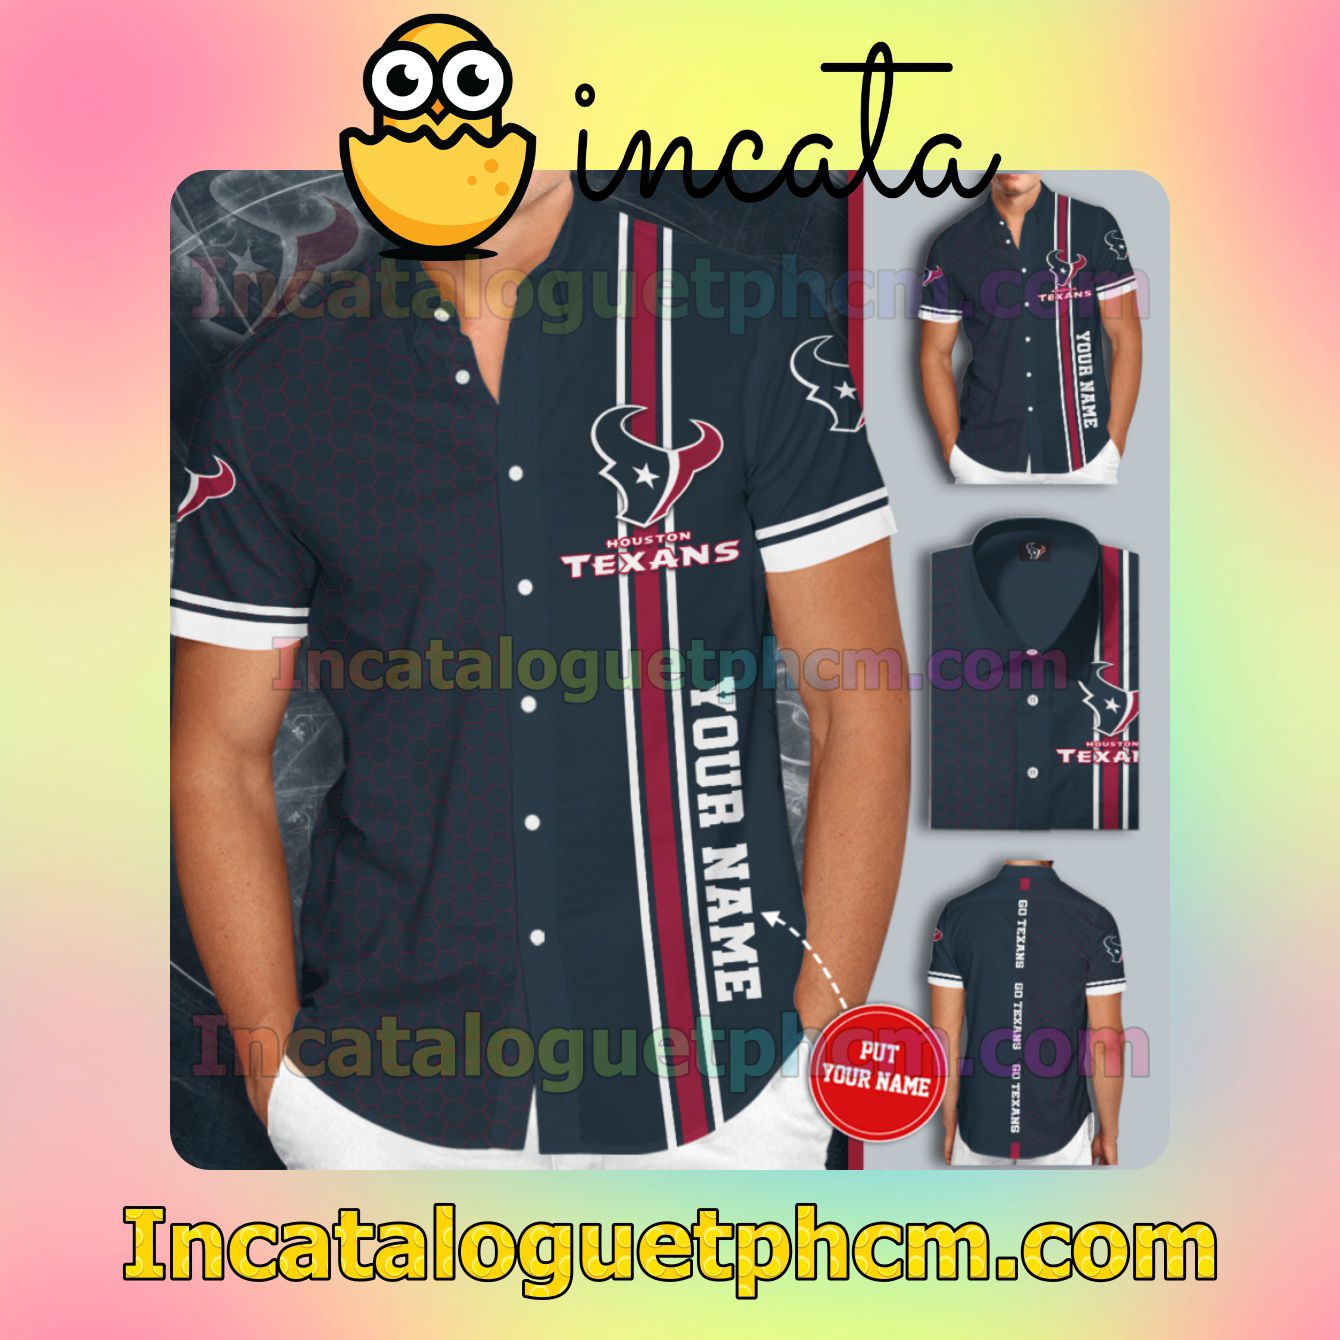 Personalized Houston Texans Tiling Navy Button Shirt And Swim Trunk